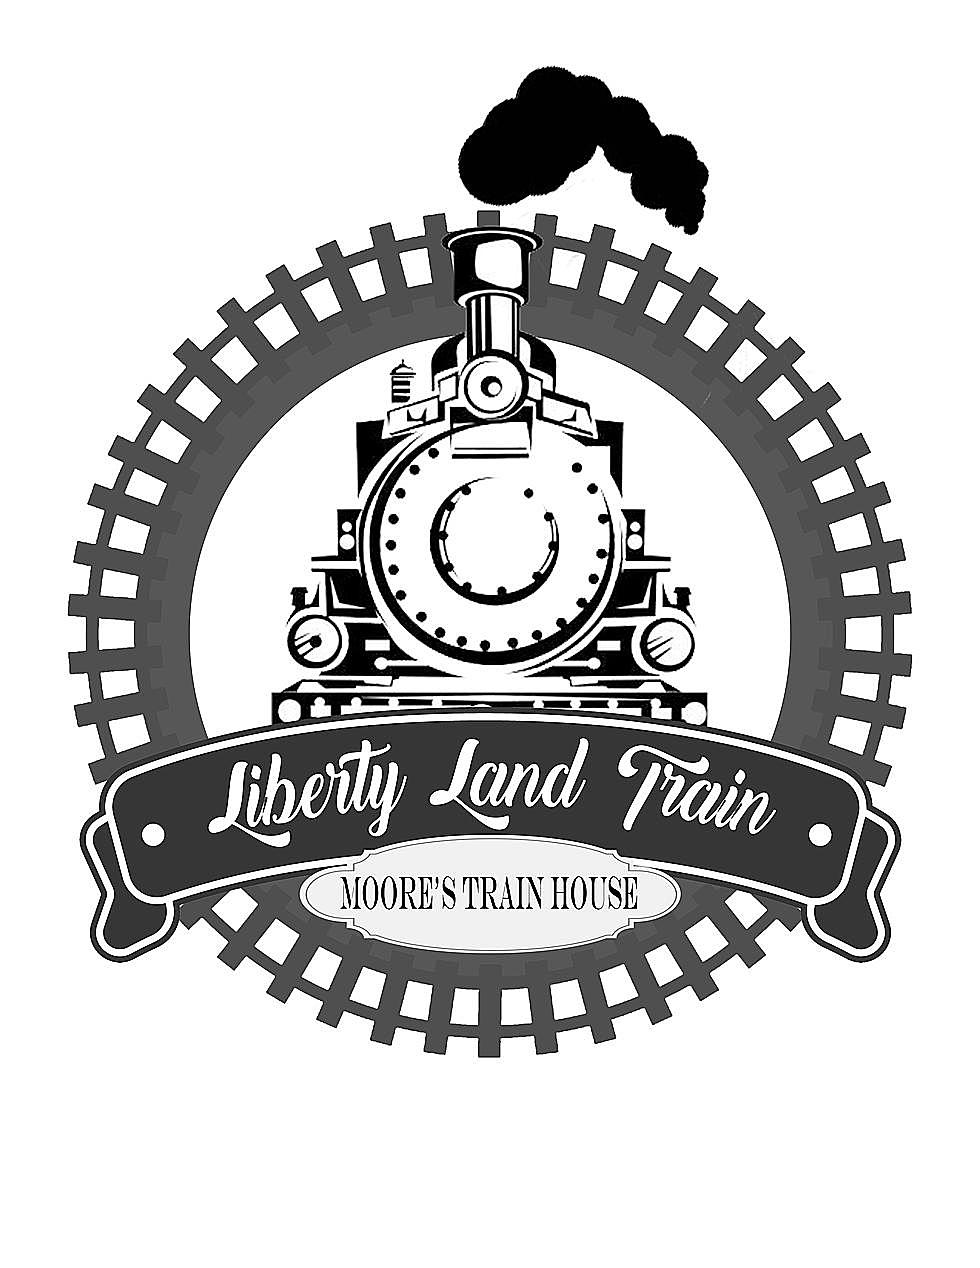 Now’s Your Chance to Drive the Liberty Land Train in Sedalia